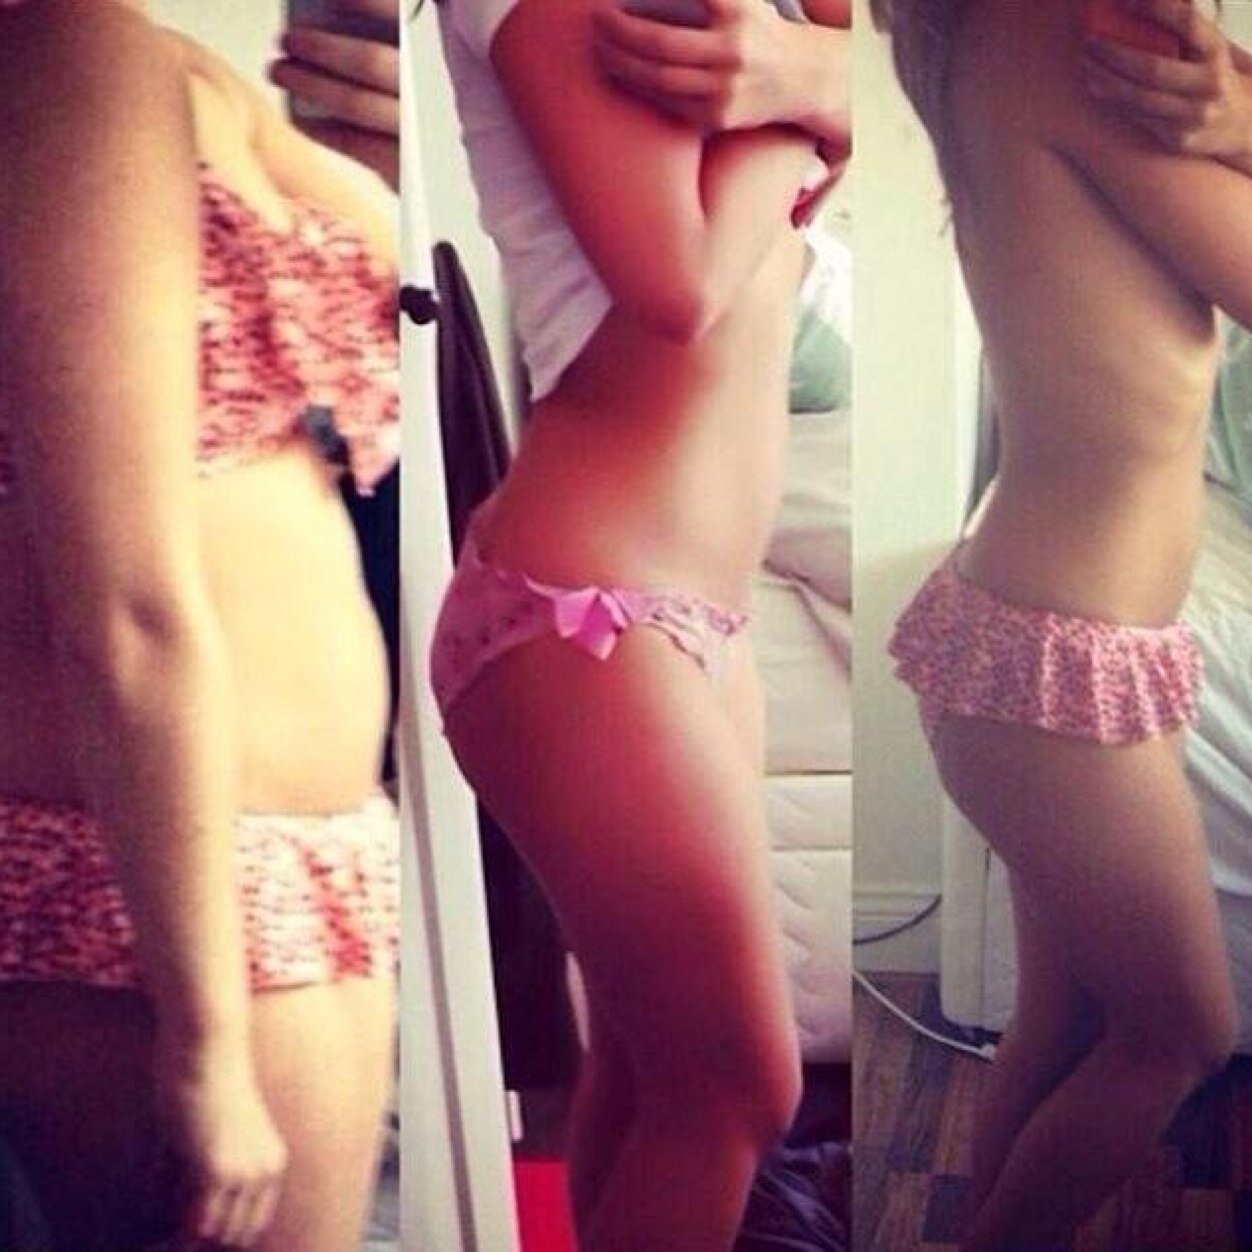 Juice Plus distributor - for amazing weight loss, toning, skin, hair & nails. Dm for details x